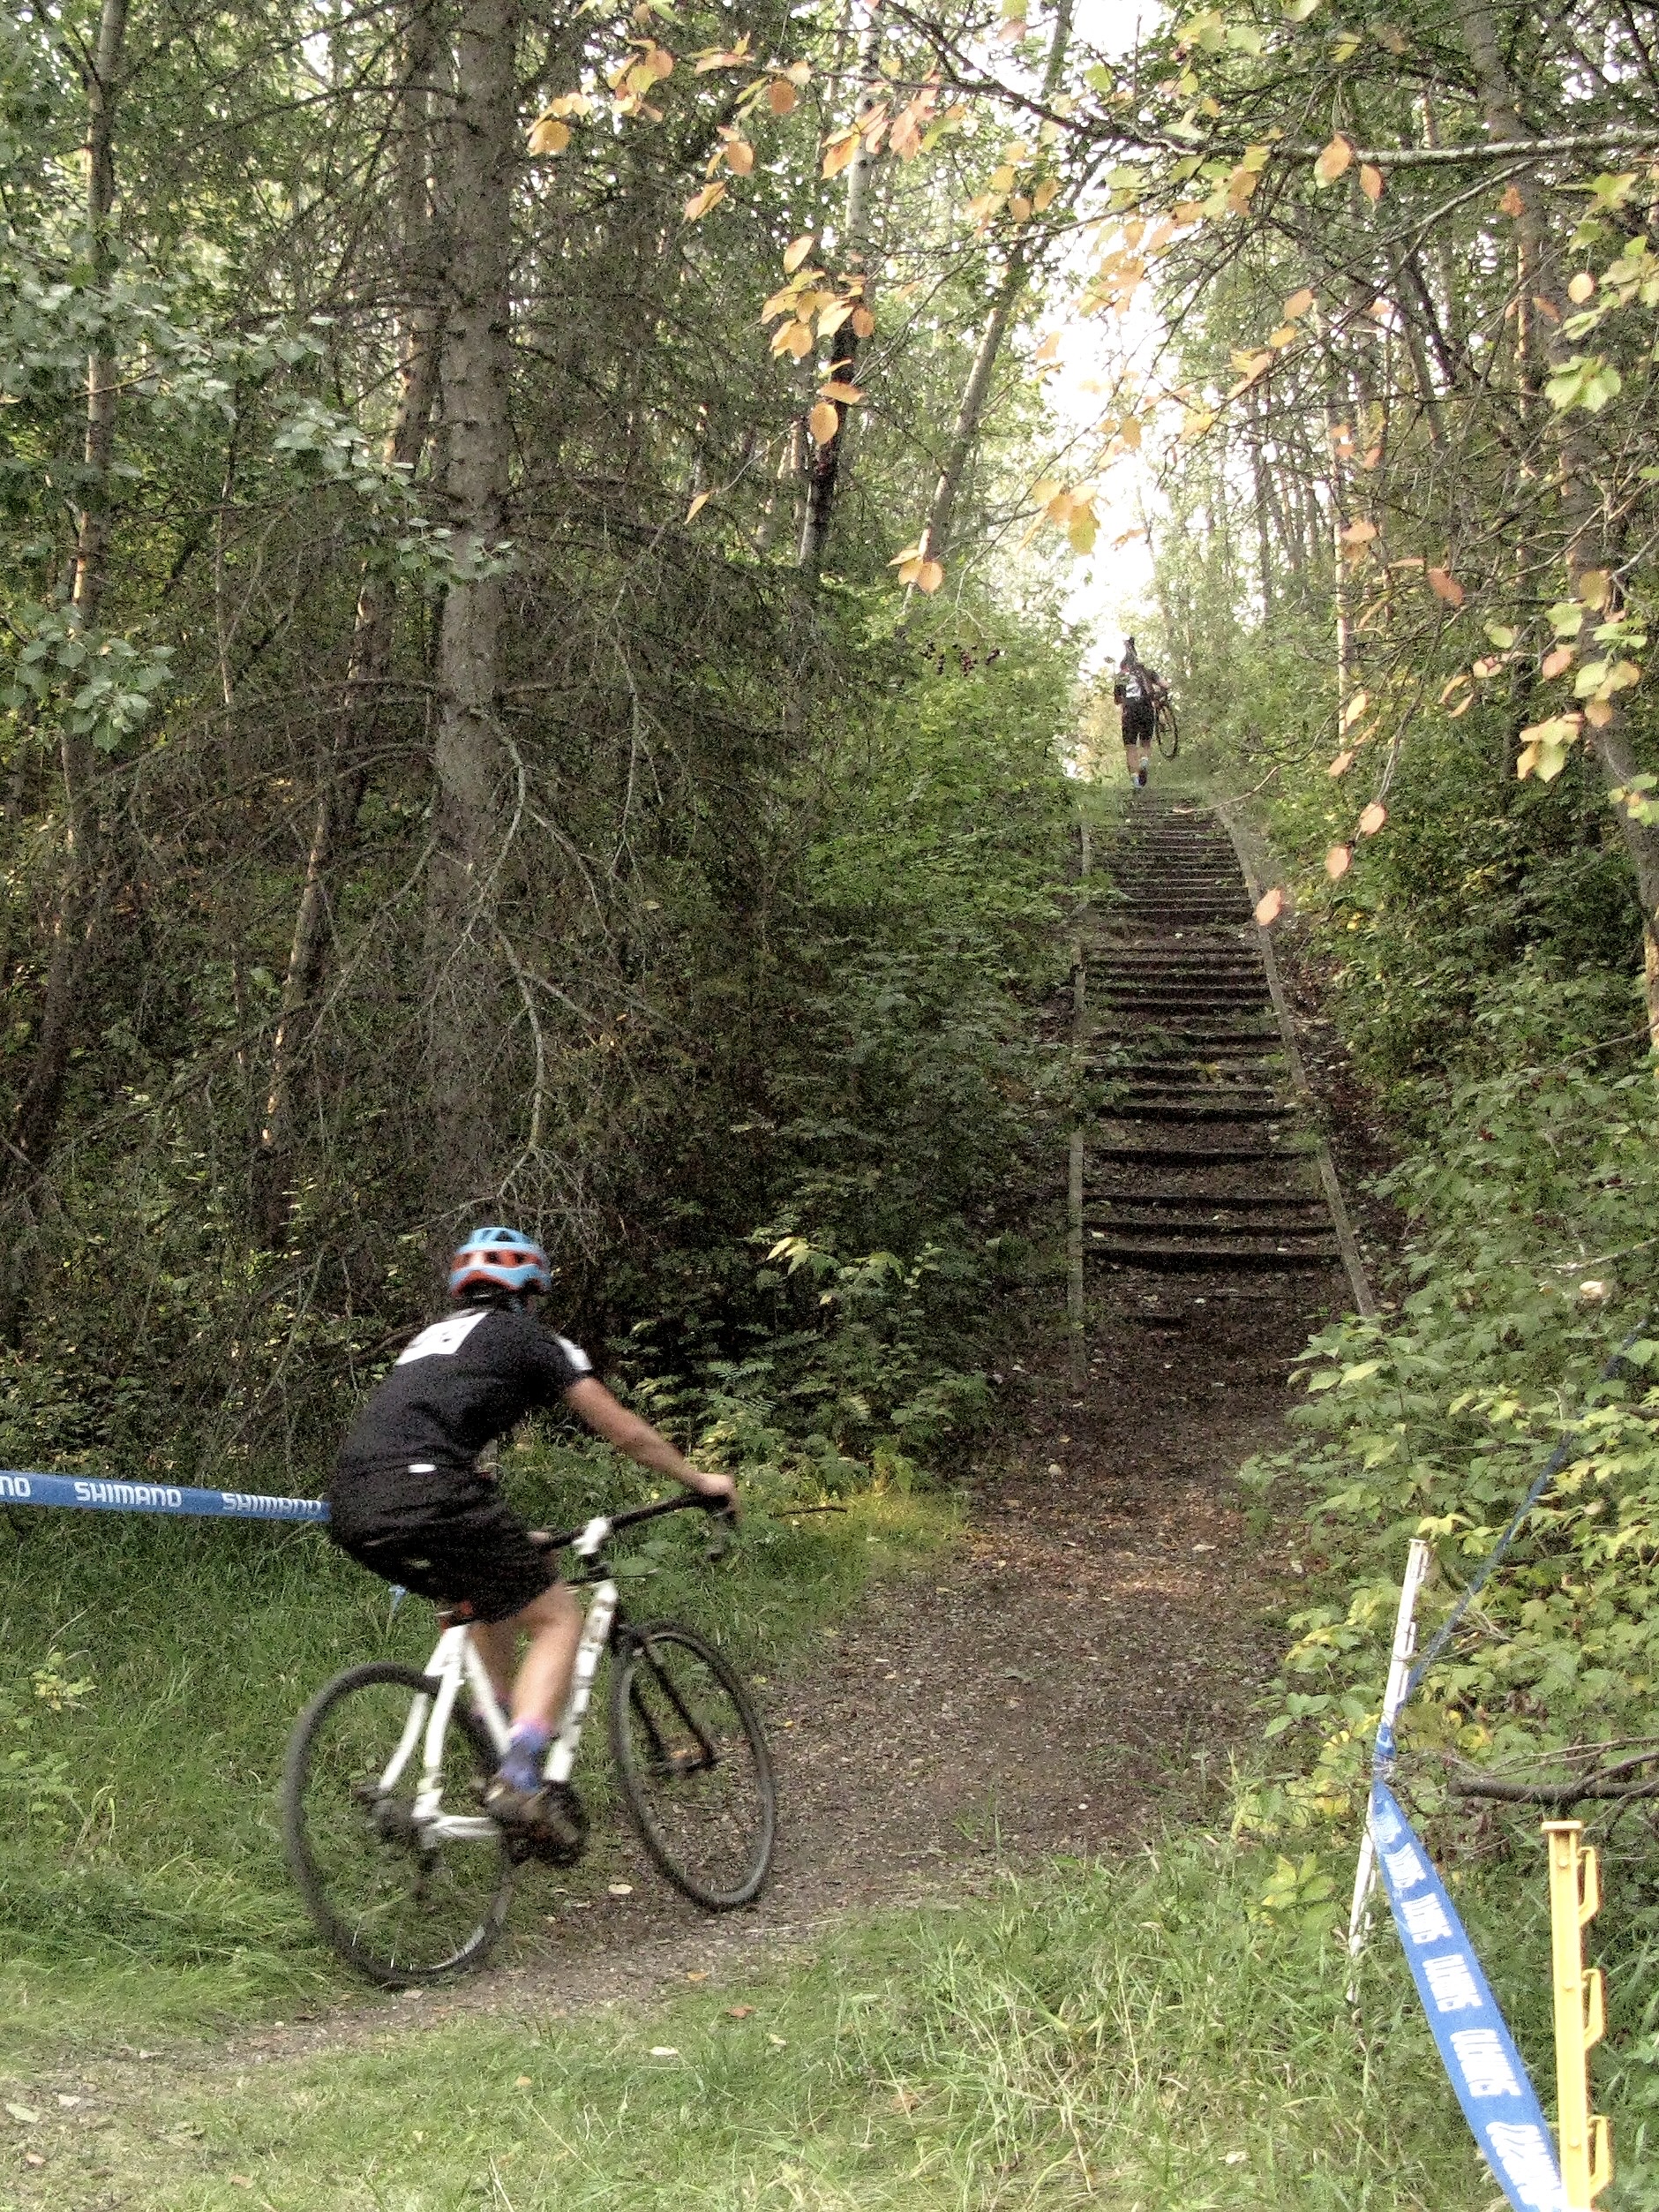 A rider approaching the stair run-up in Strathcona Science Park